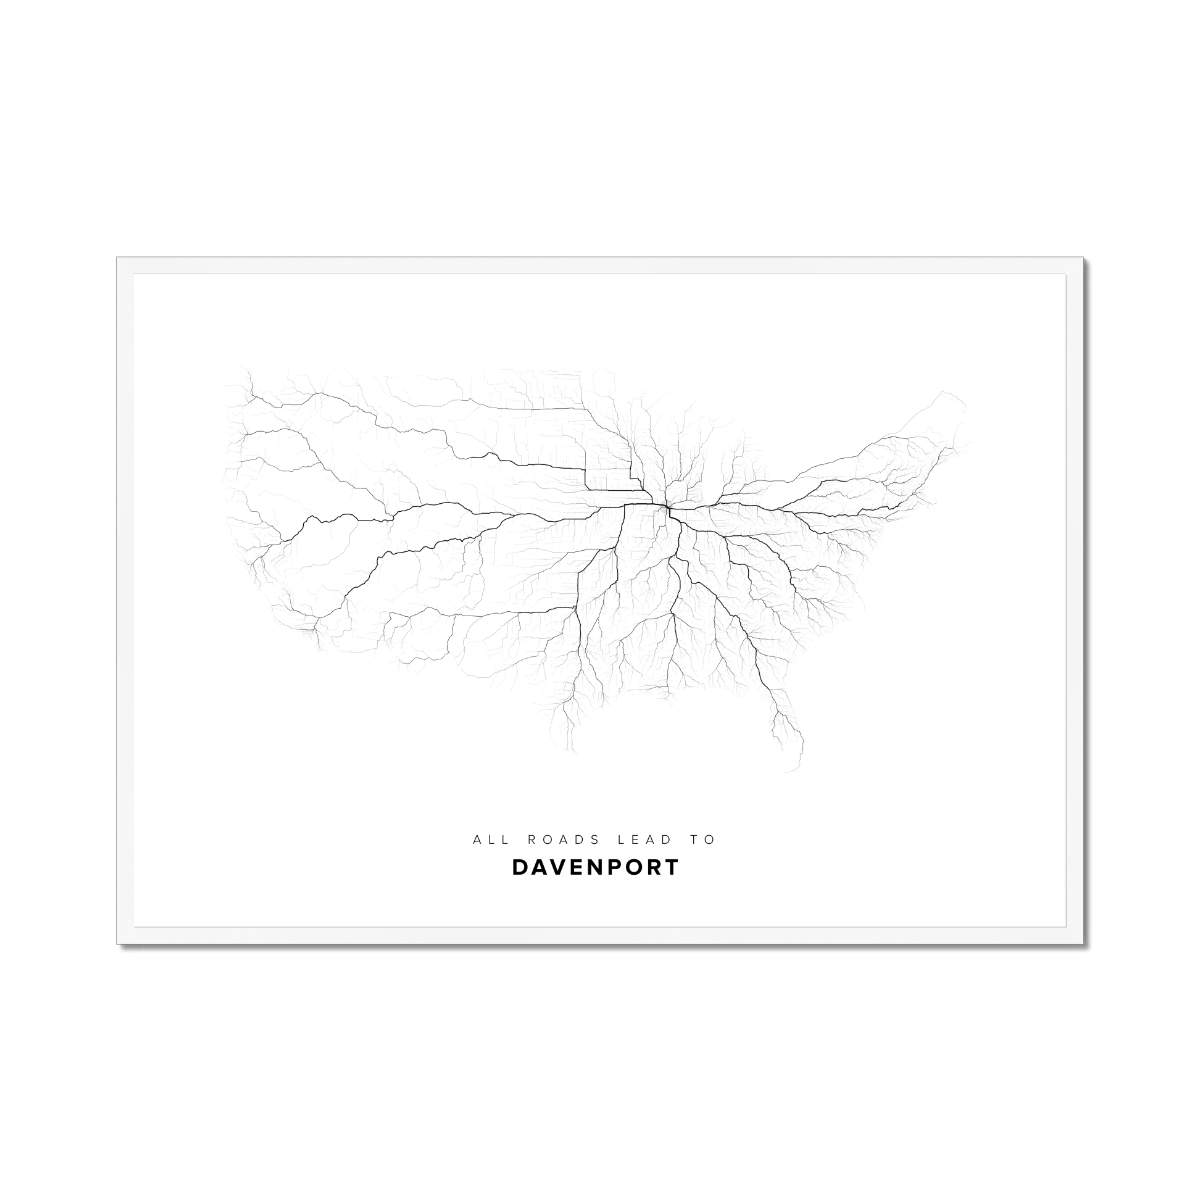 All roads lead to Davenport (United States of America) Fine Art Map Print